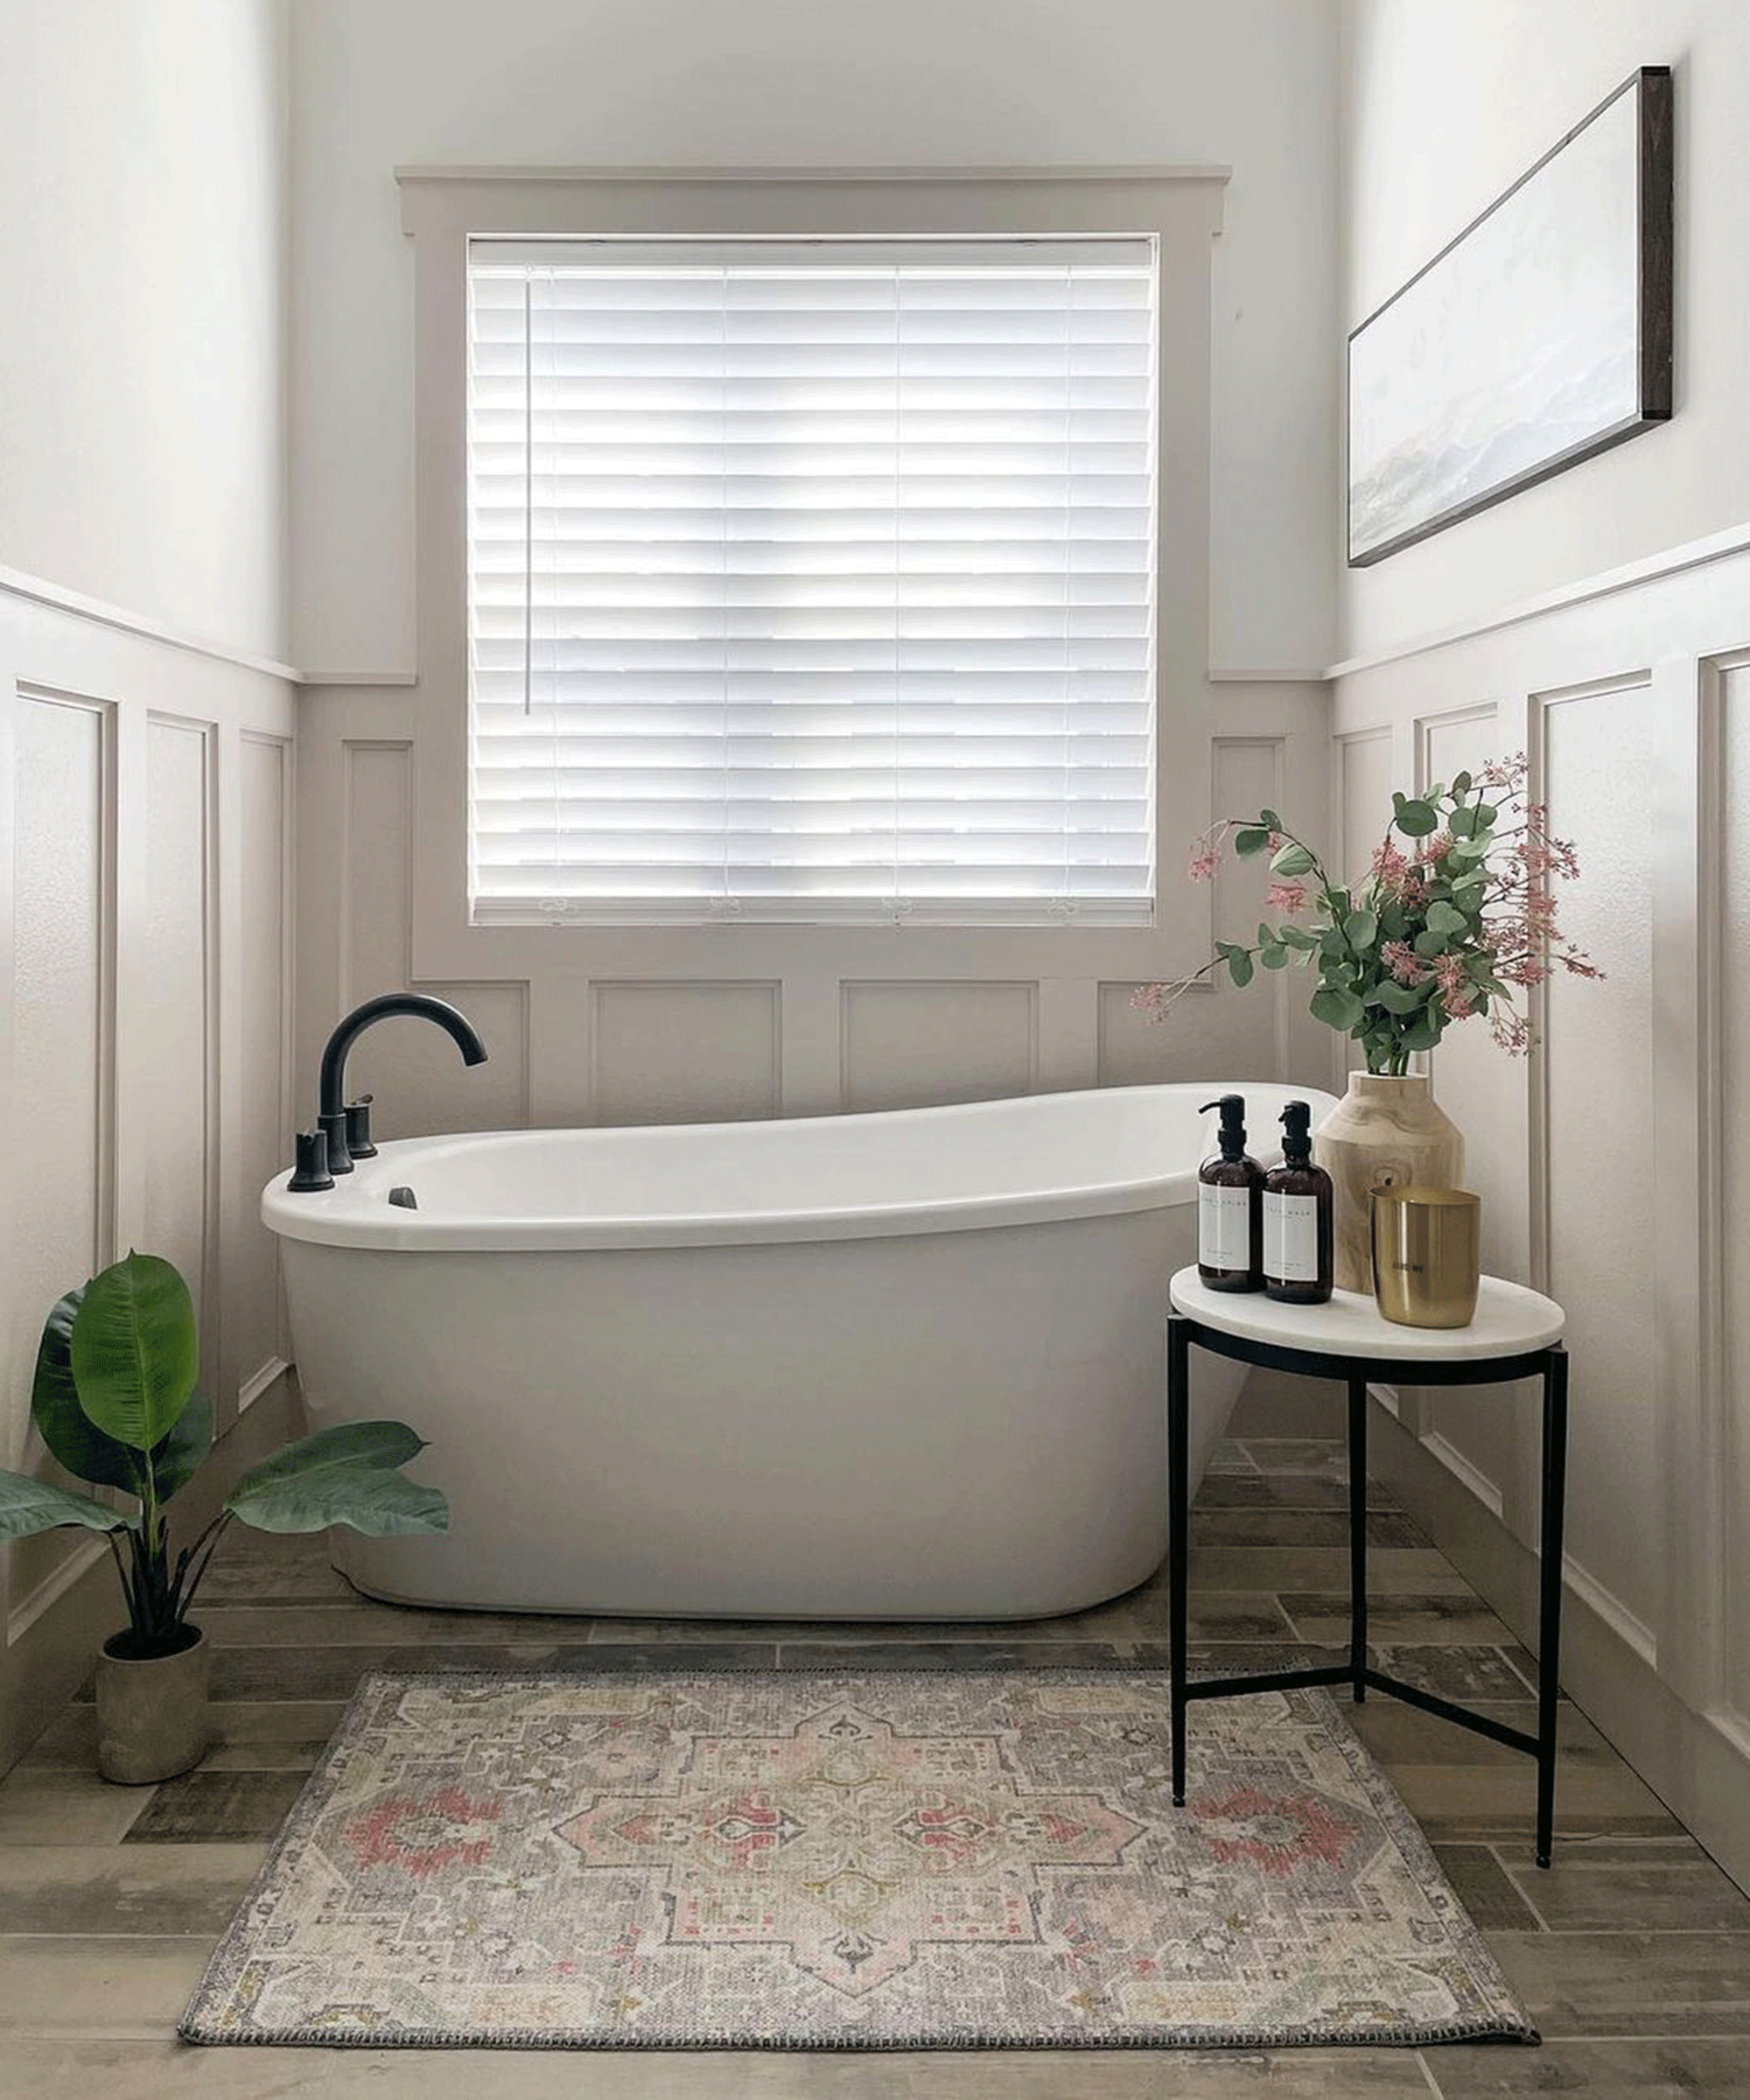 A small bathroom with bathtub, including blind window treatment, wall paneling (painted in a mid grey paint), side table, exotic rug and indoor houseplant